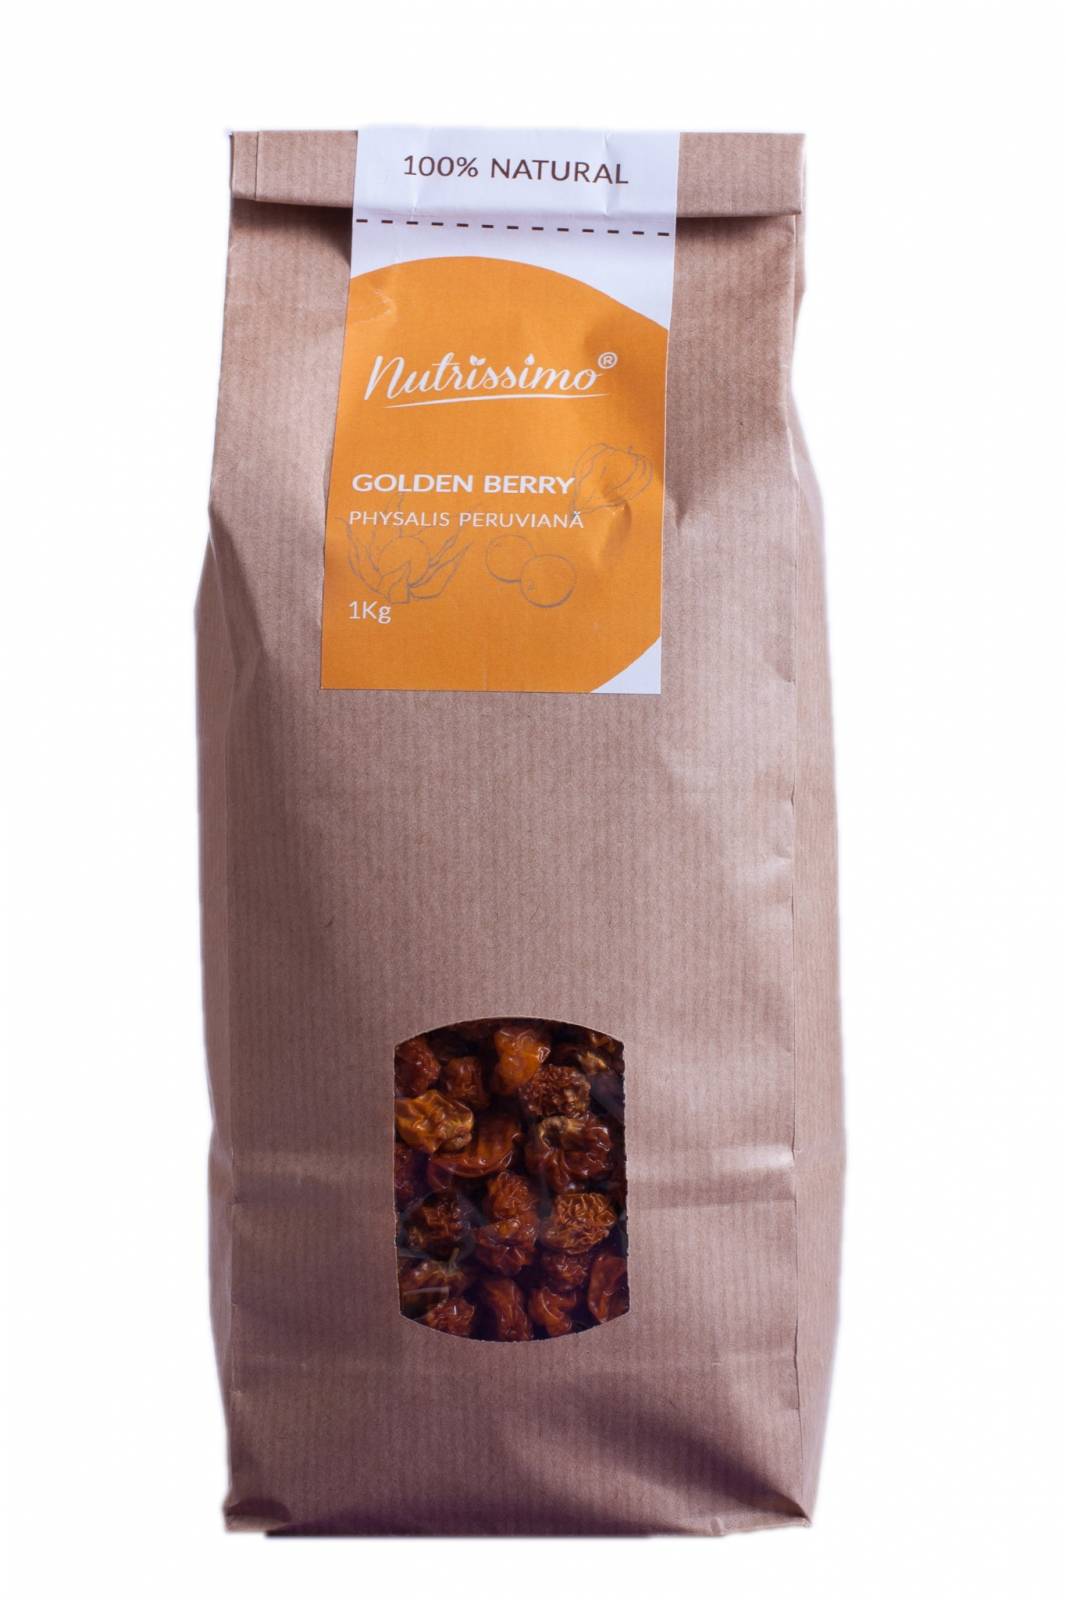 Golden berry, physalis uscate, 1kg - nutrissimo